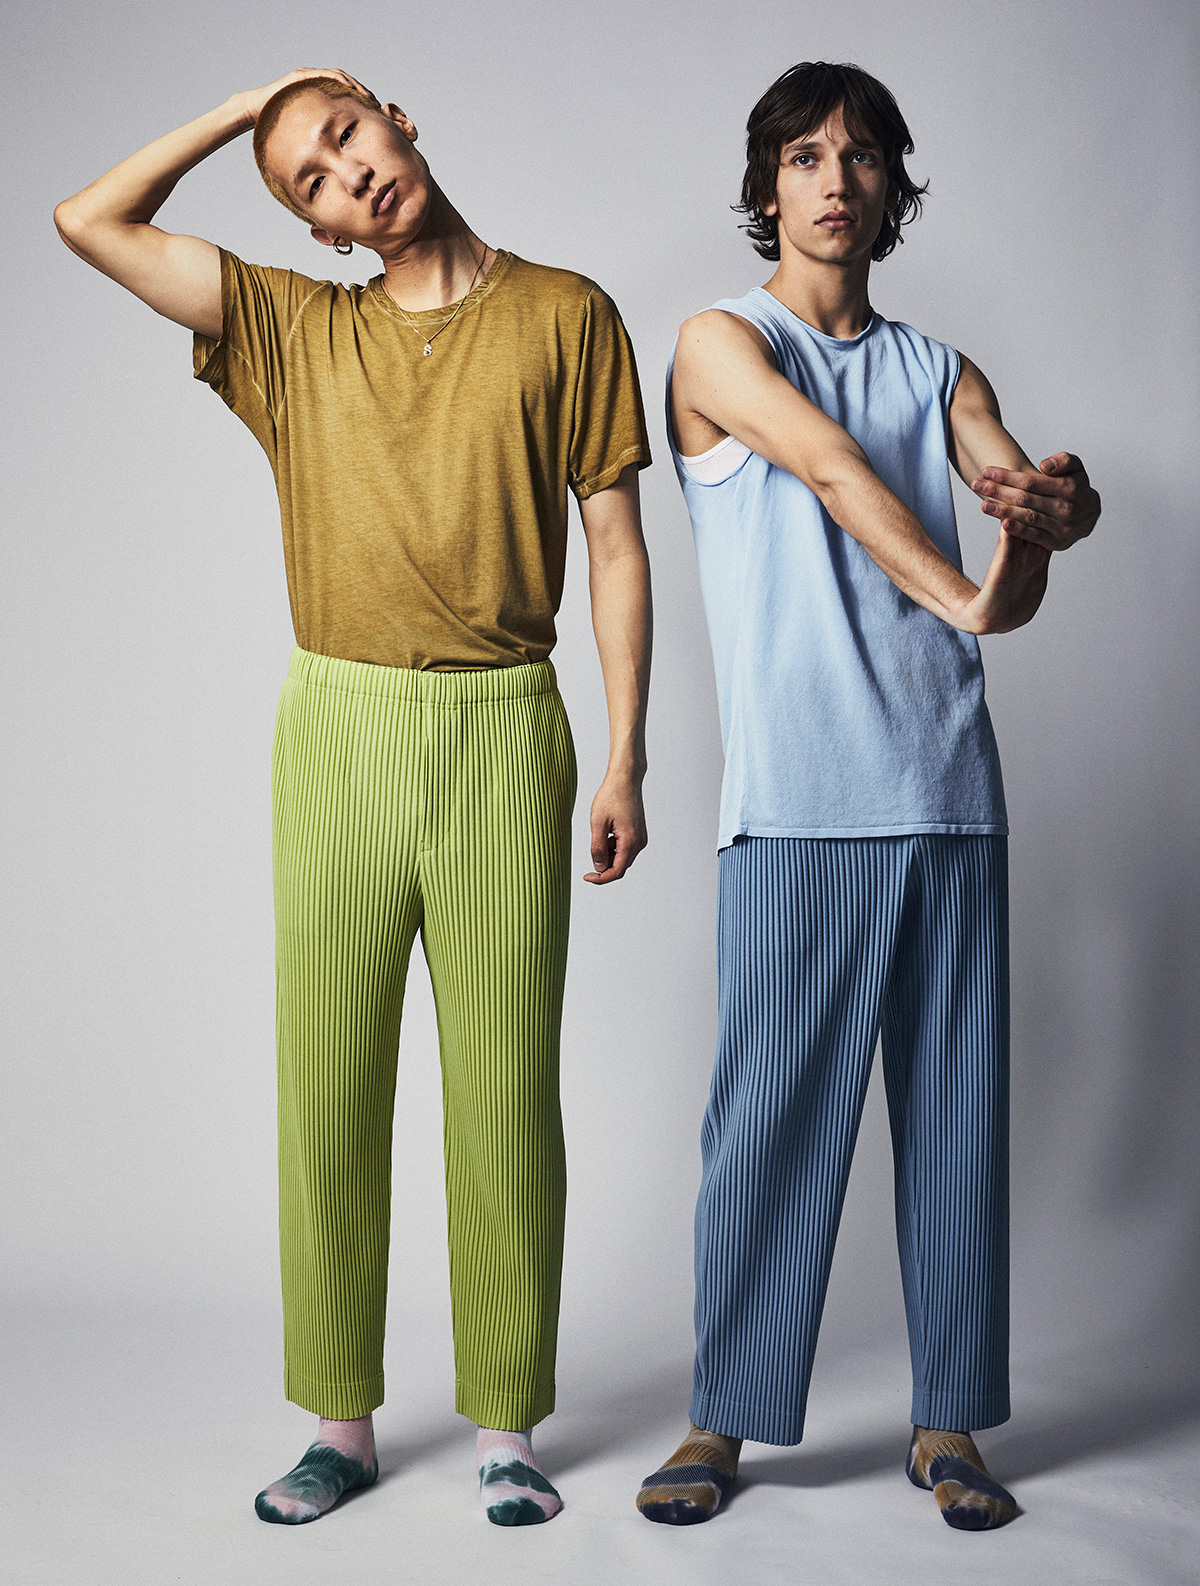 On Wooseok (left) T-shirt LULULEMON x ROBERT GELLER / Trousers by HOMME PLISSE ISSEY MIYAKE / Necklace Models own / Socks N/A / On Eliseu (right) Tank COS / Tank (worn underneath) Stylists own / Trousers HOMME PLISSE ISSEY MIYAKE / Socks N/A